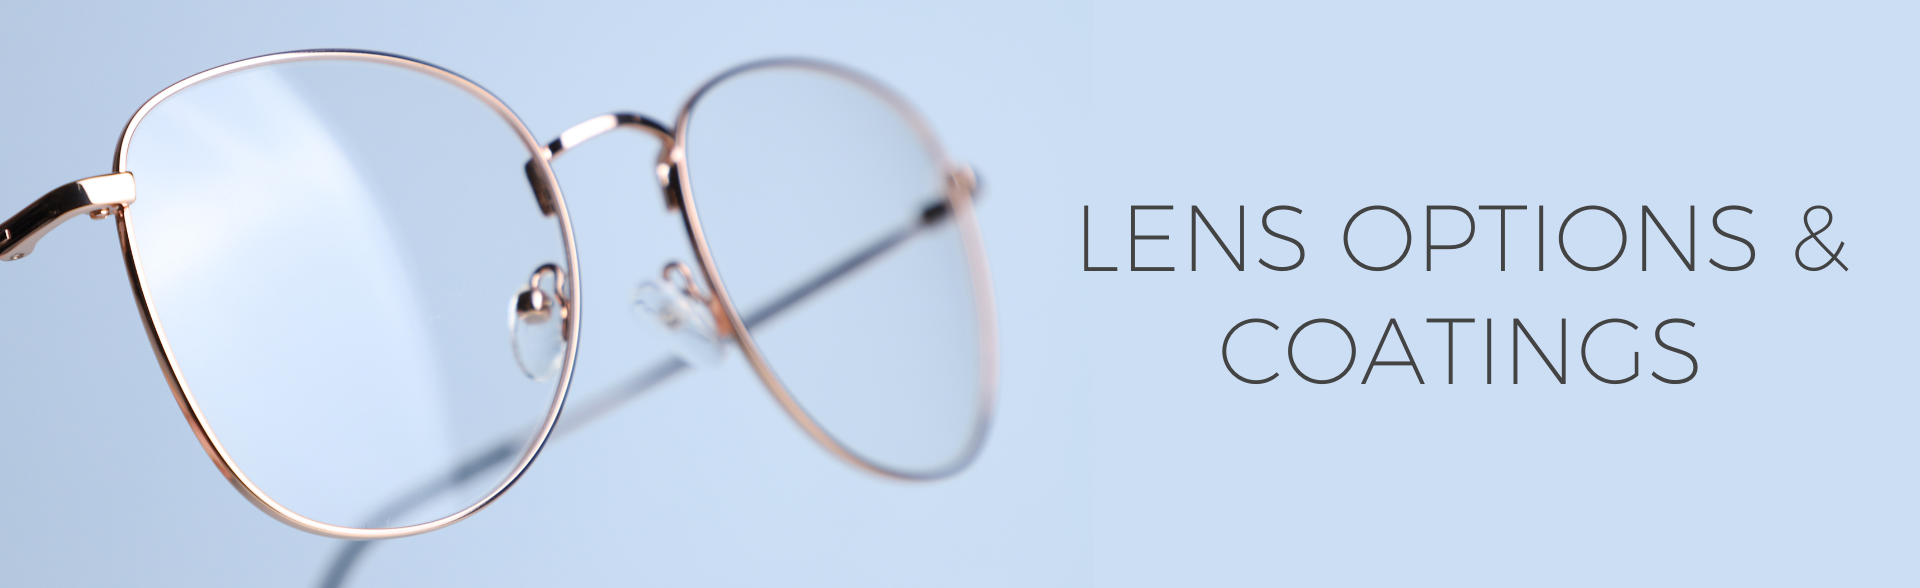 lens options and coatings